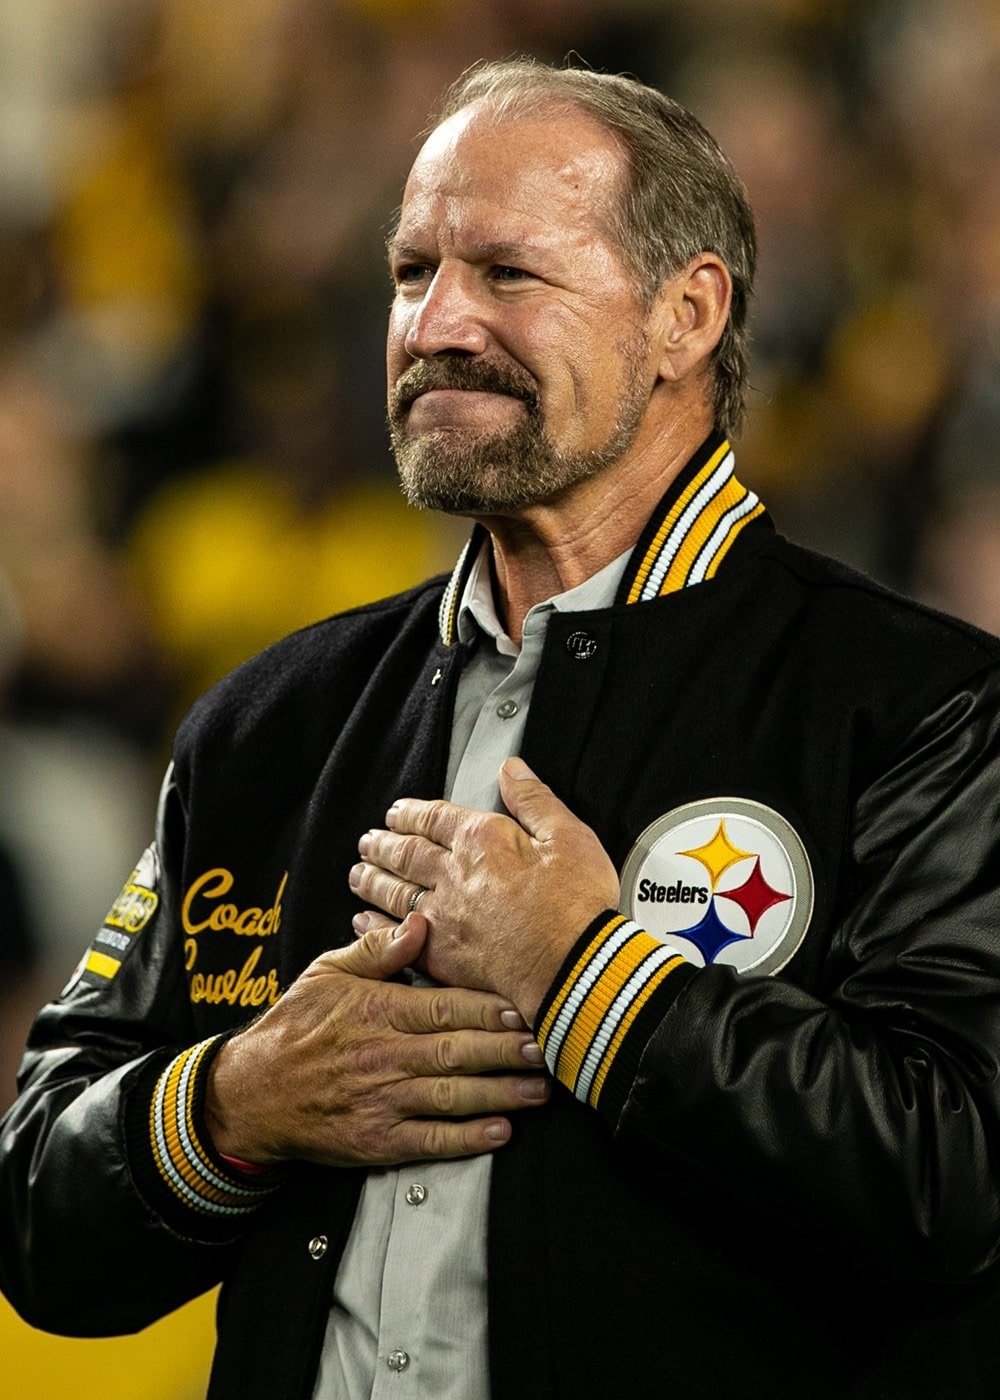 Image of Bill Cowher at a game.